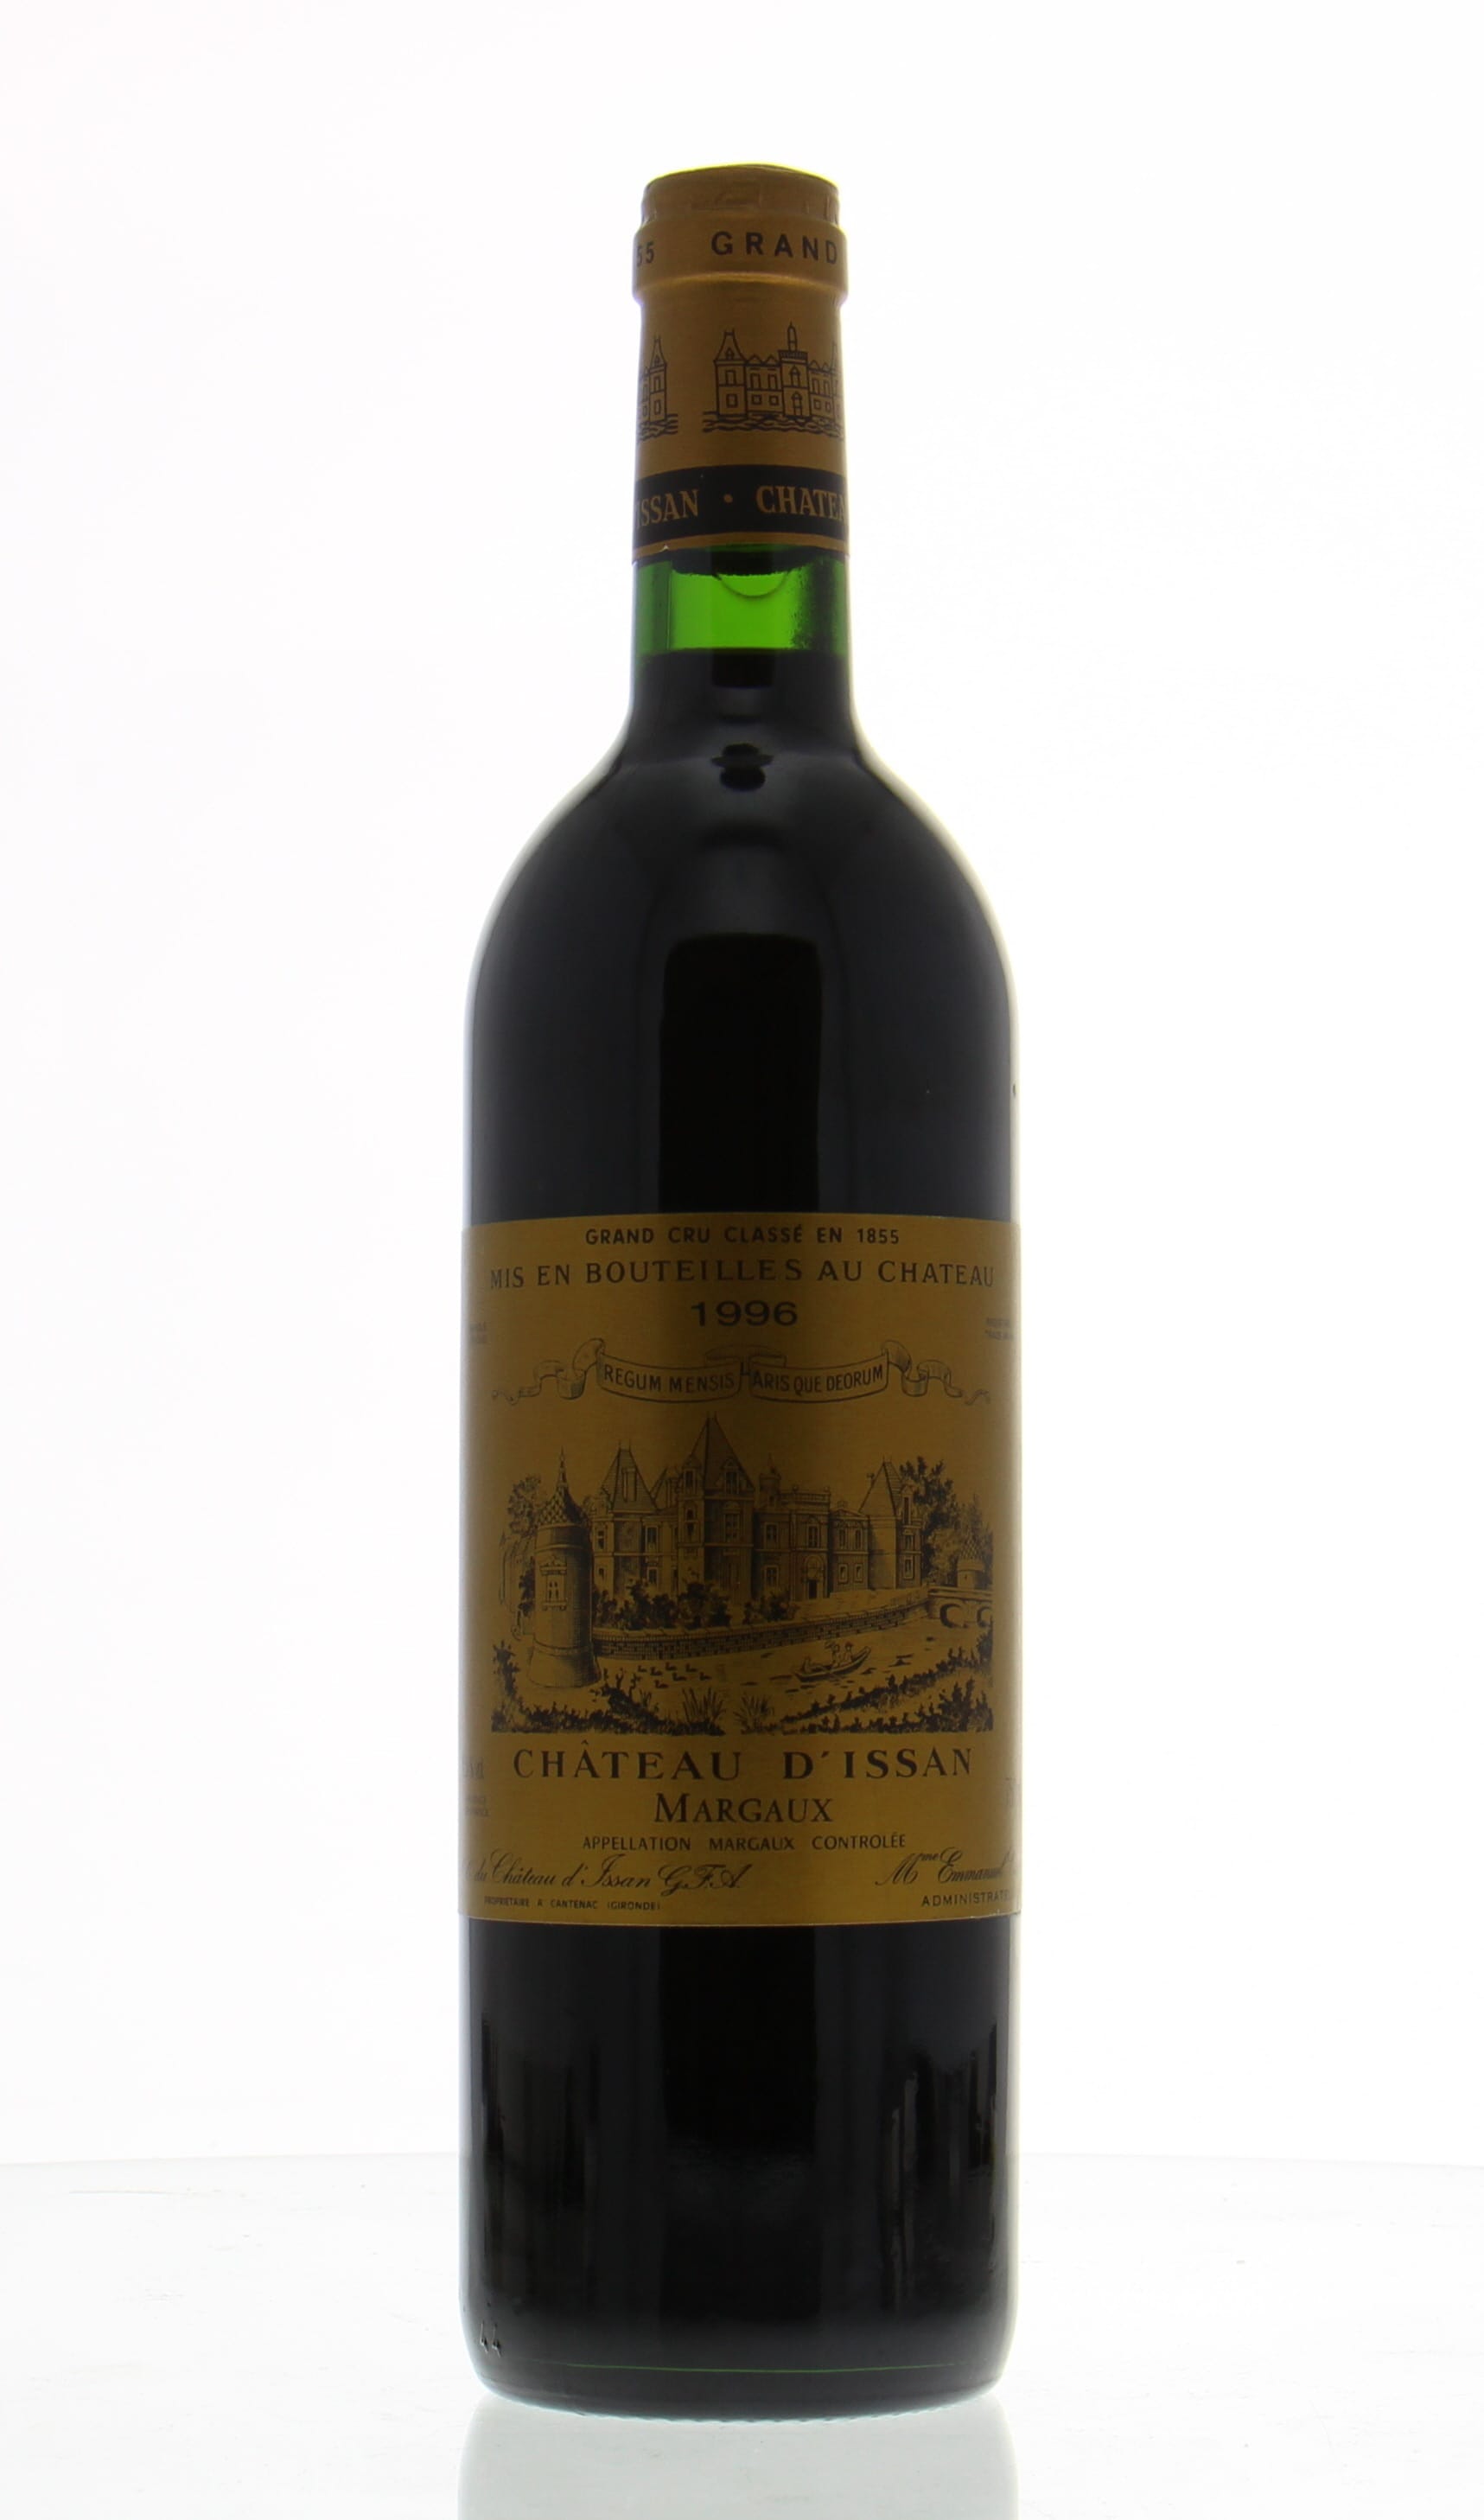 Chateau D'Issan - Chateau D'Issan 1996